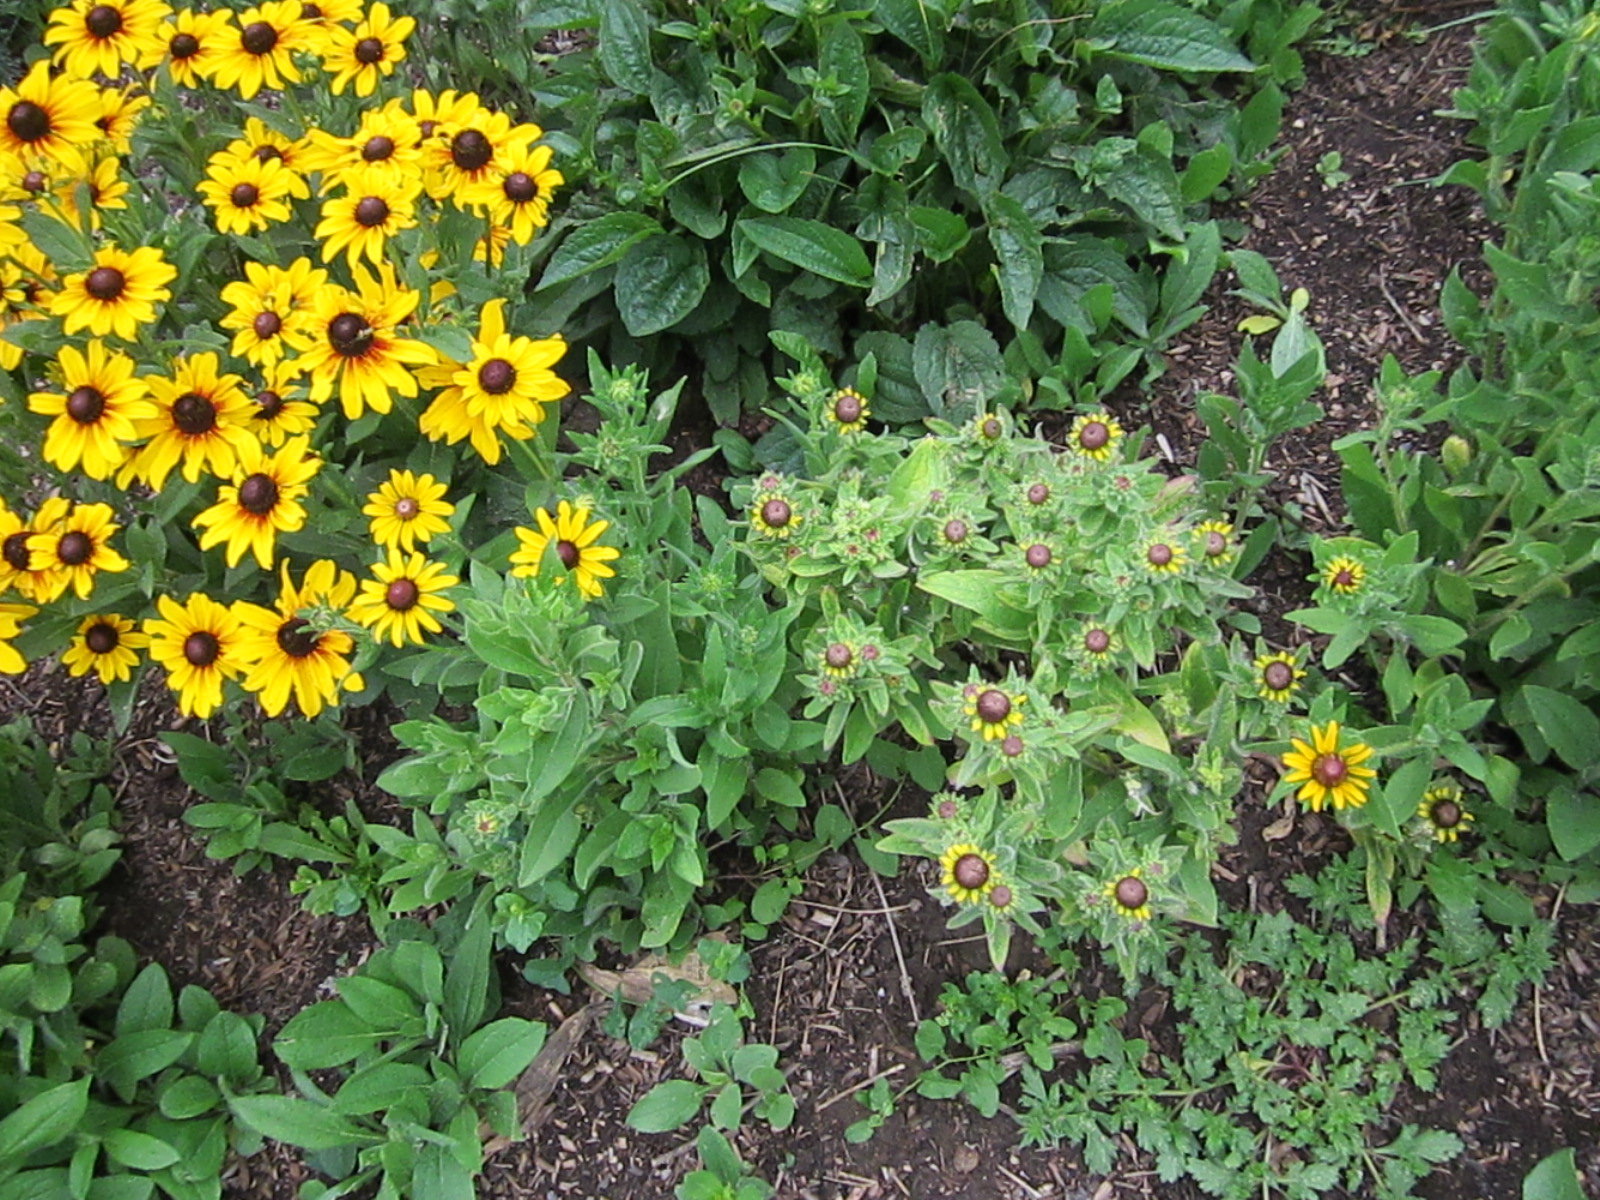 A cluster of yellow flowers with a large patch of green, wilting flowers on the right.